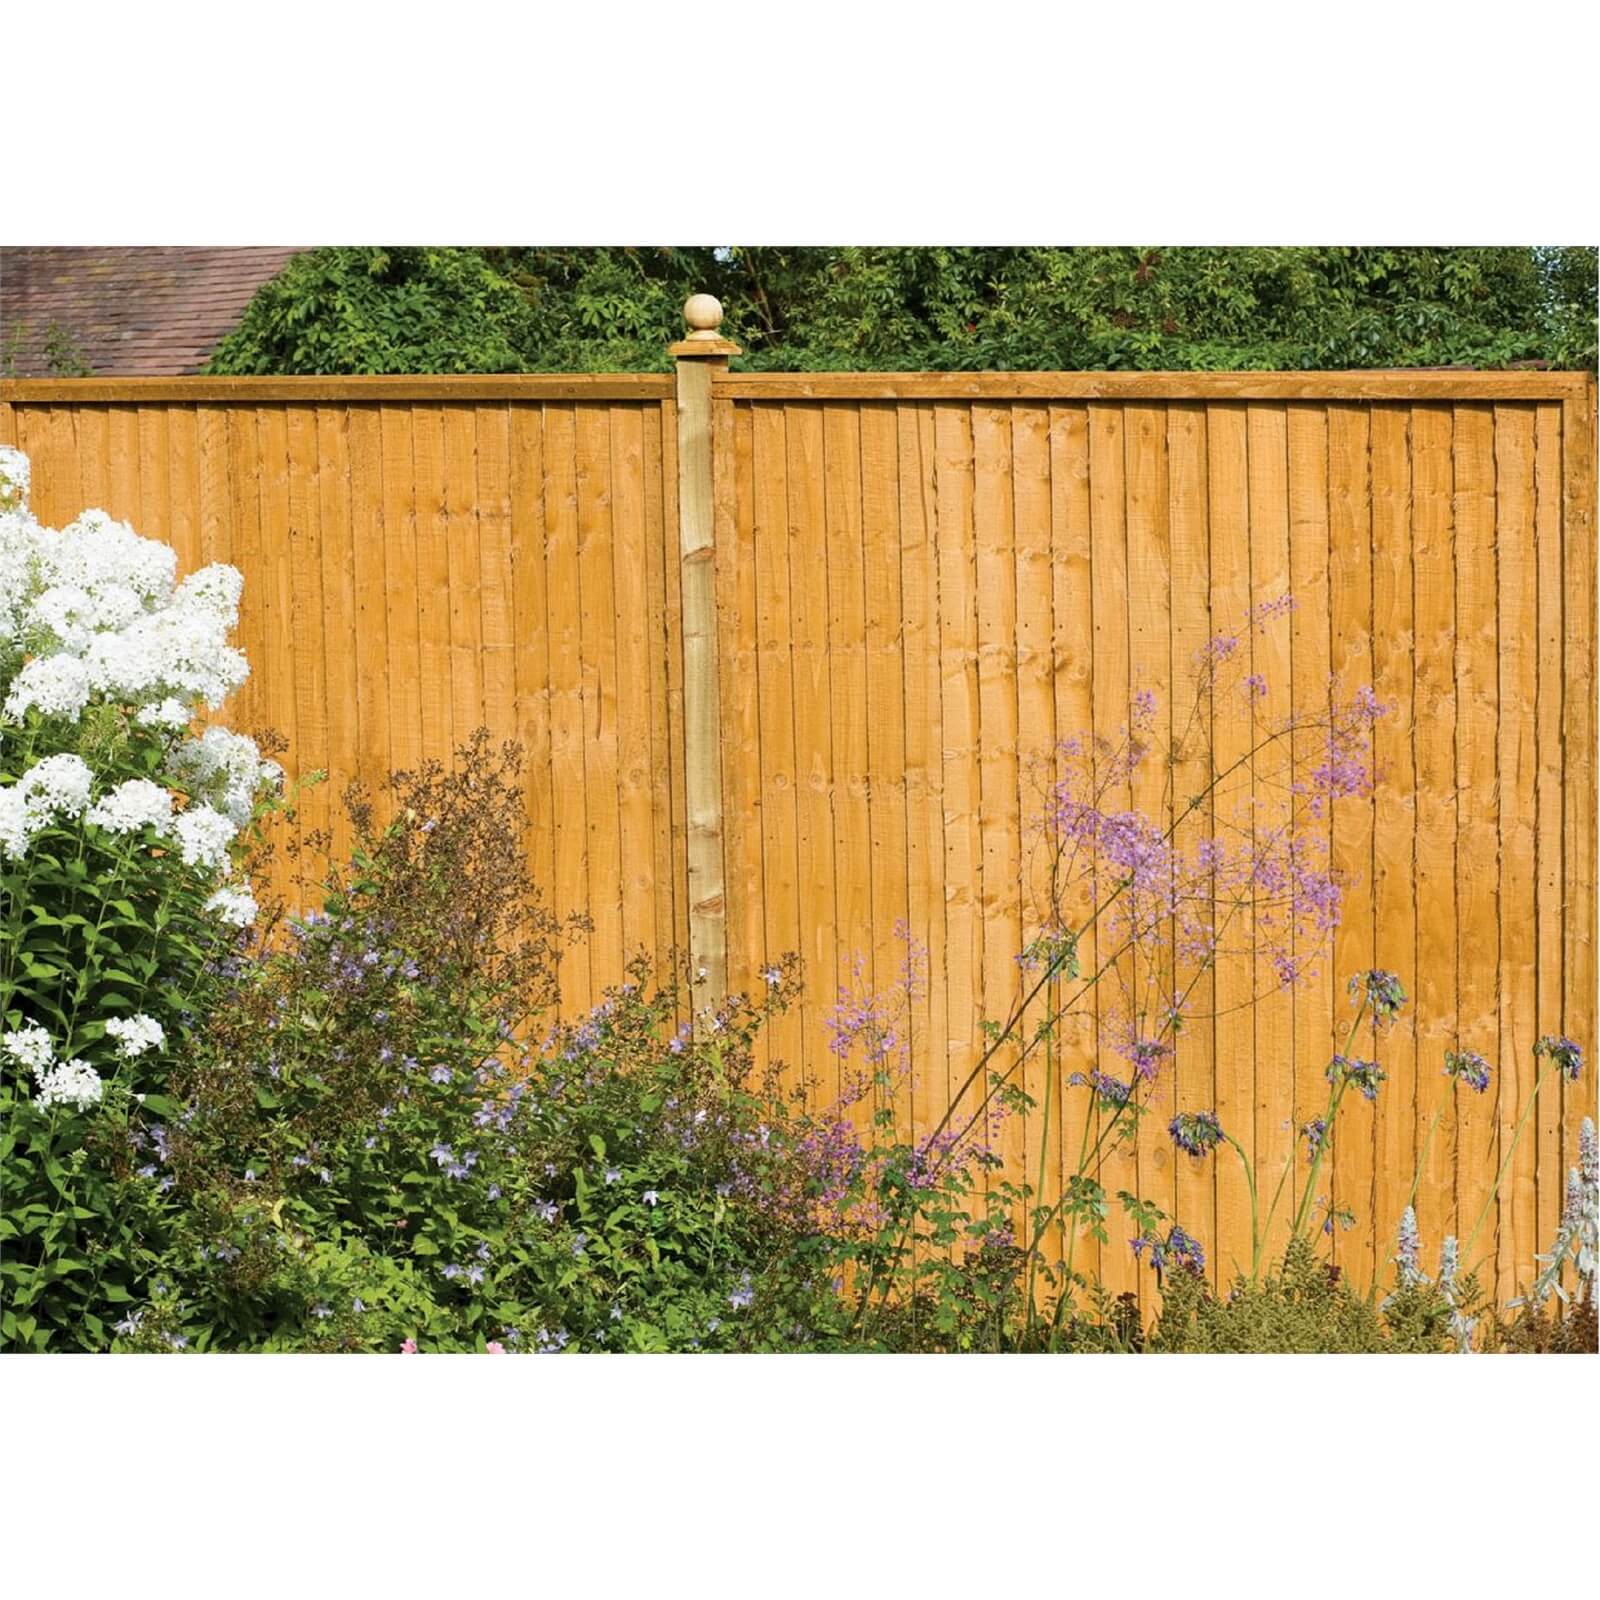 Forest Larchlap Closeboard 1.5m Fence Panel - Pack of 5